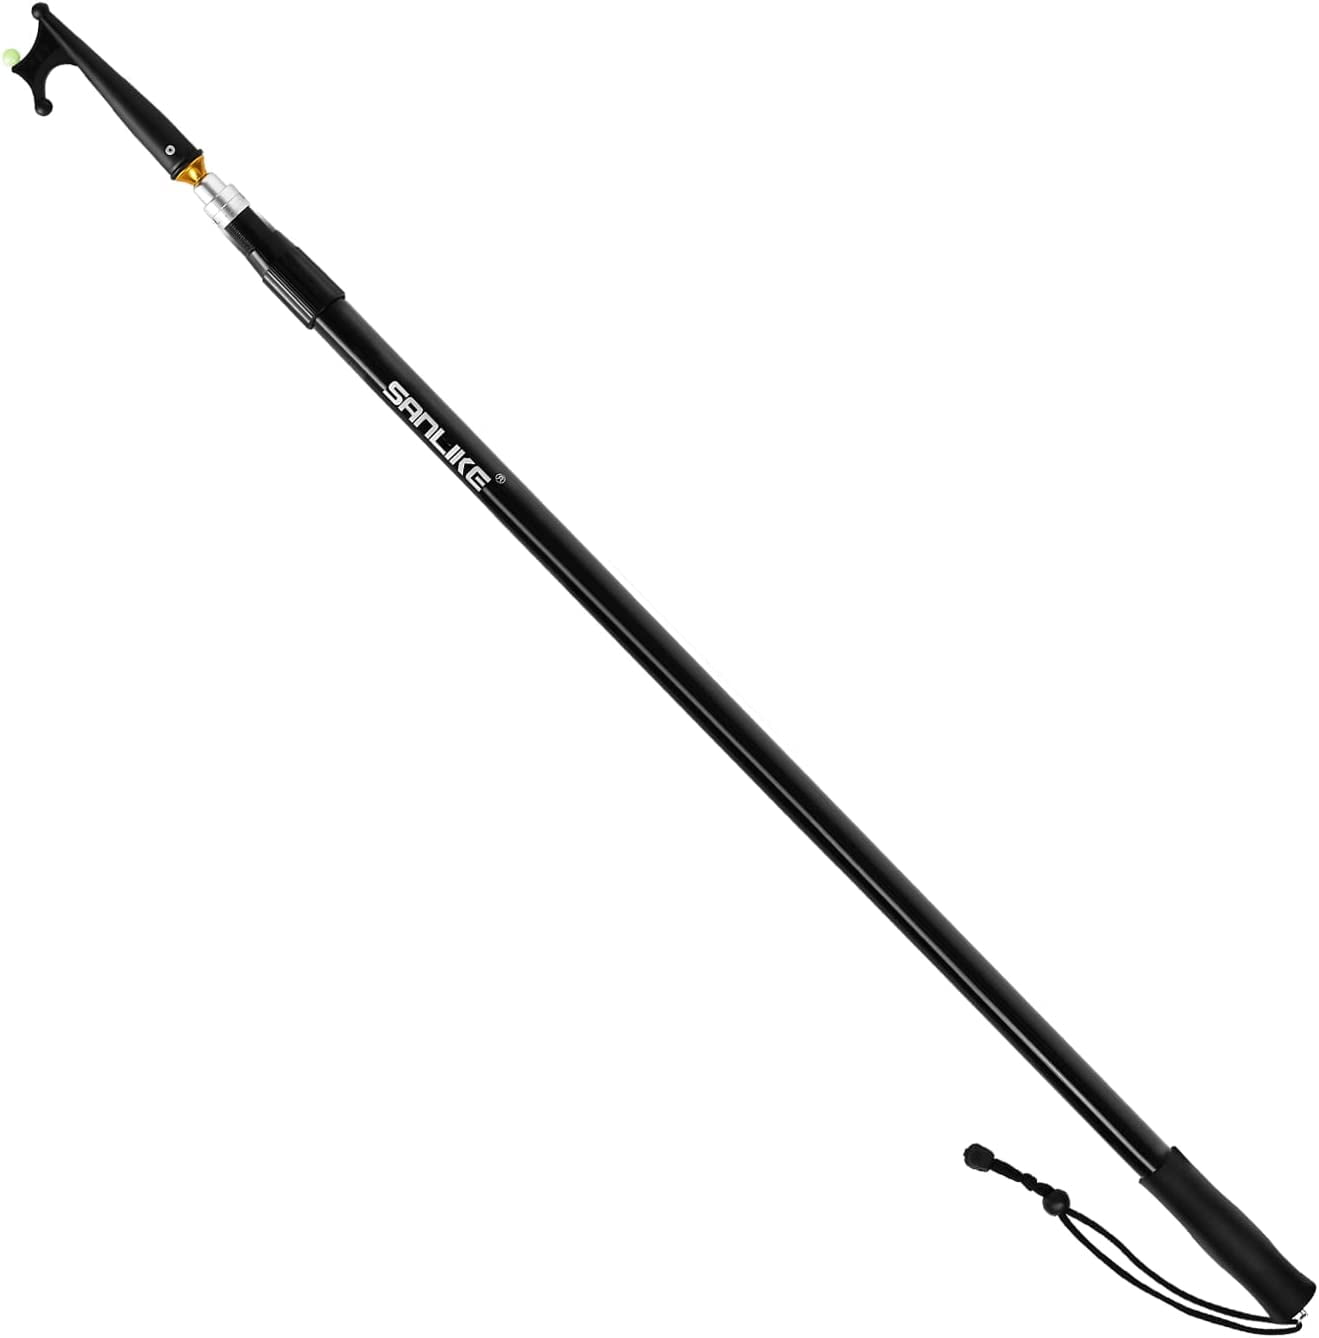 SAN LIKE Telescopic Boat Hook - Floating,Durable,Rust-Resistant with  Luminous Bead,Black Push Pole for Docking Extends from 3.8Ft to 8Ft 